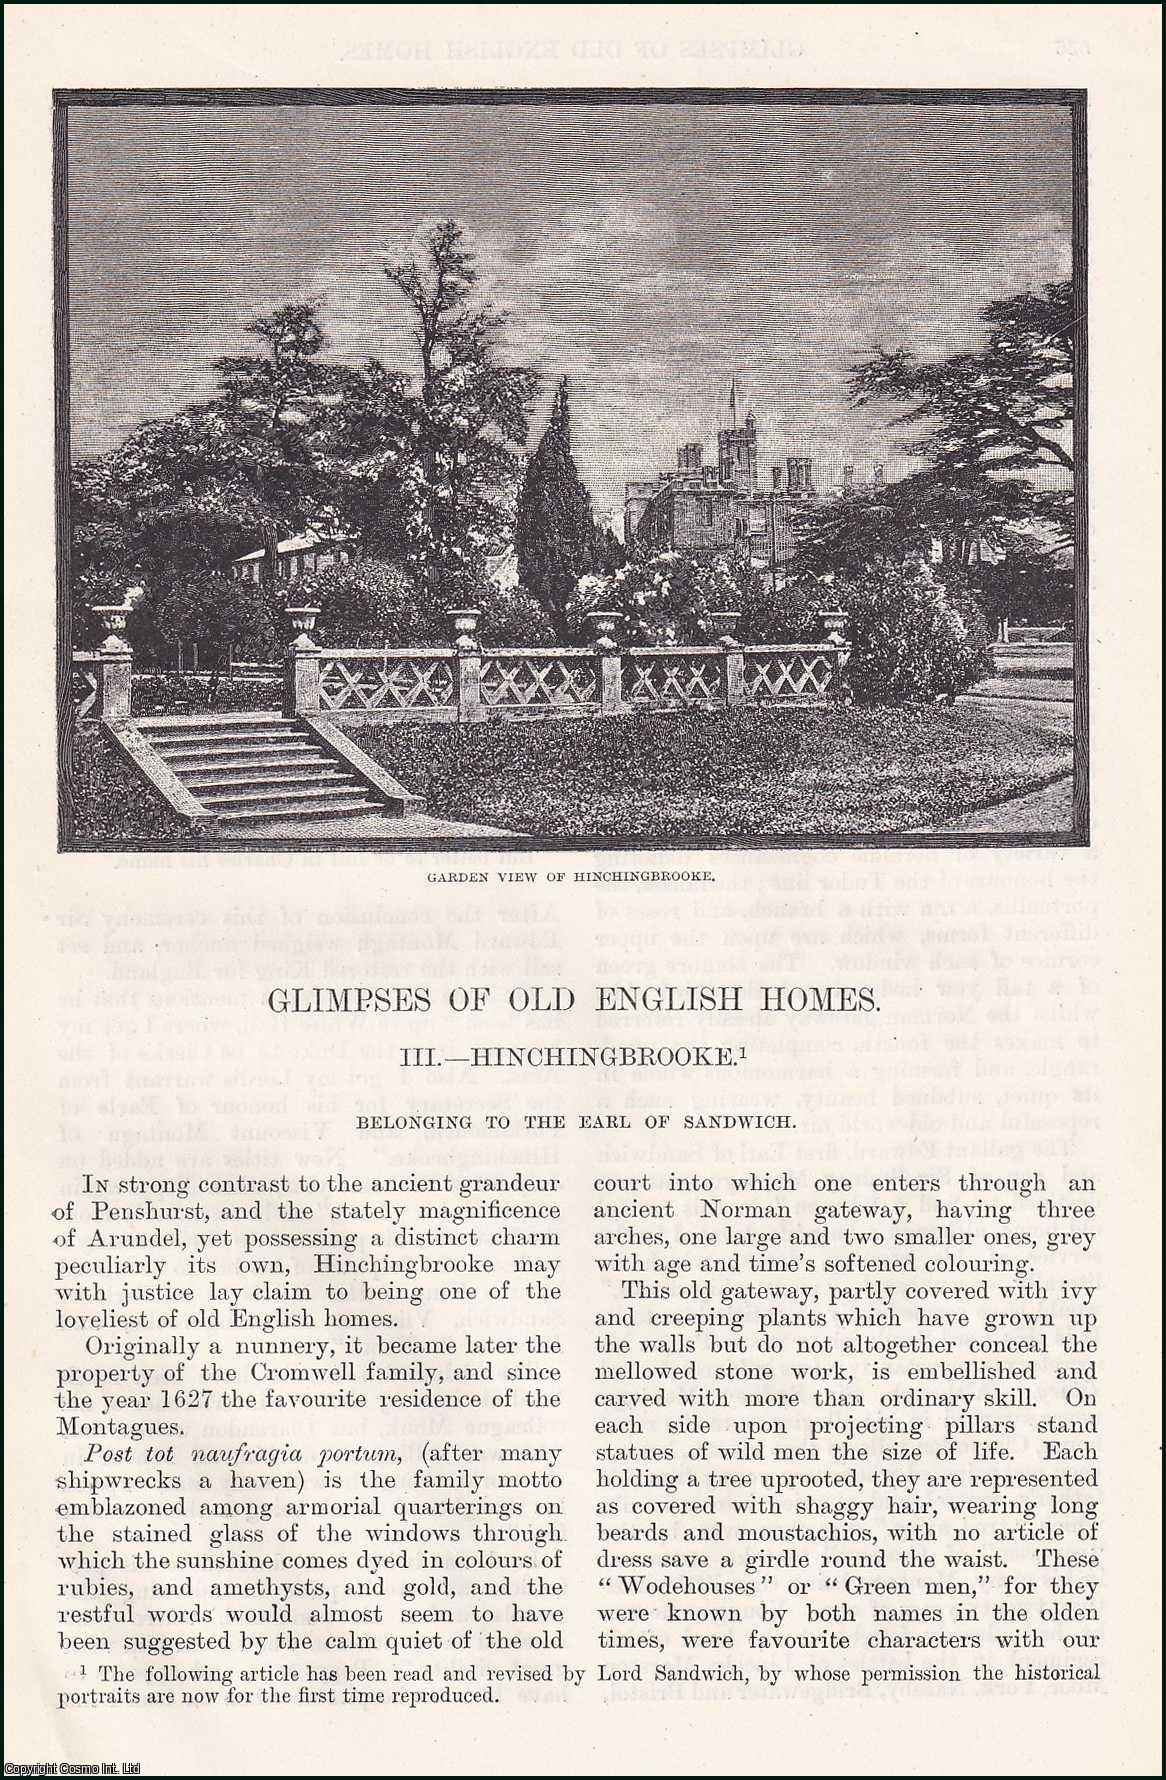 Elizabeth Balch - Hinchingbrooke; Glimpses of Old English Homes. An original article from the English Illustrated Magazine, 1888.